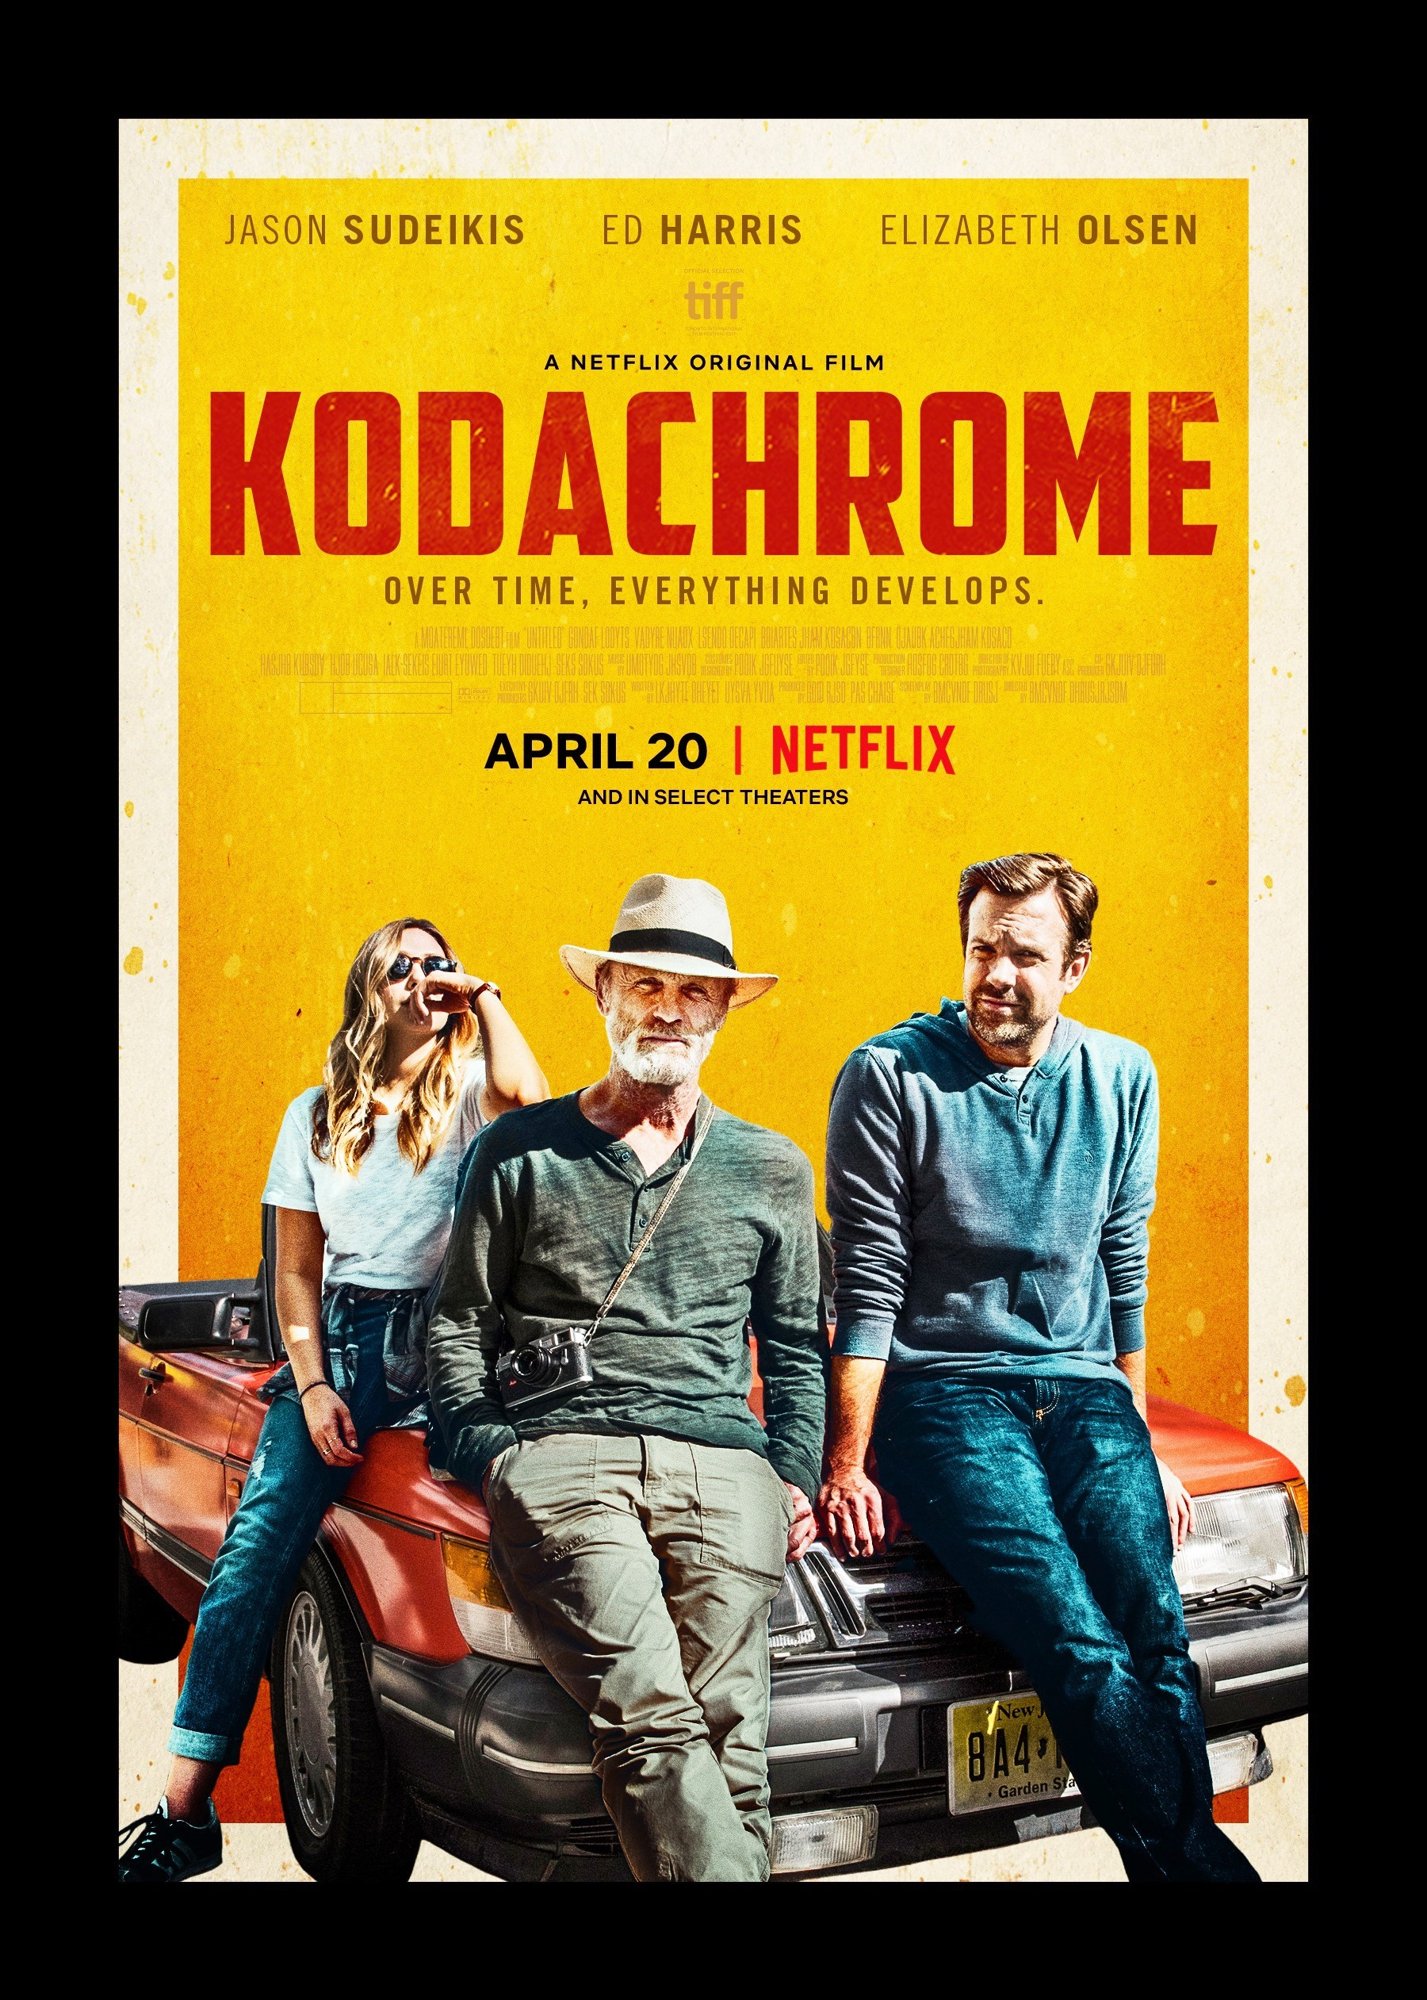 Kodachrome (2018) Pictures, Photo, Image and Movie Stills1427 x 2000